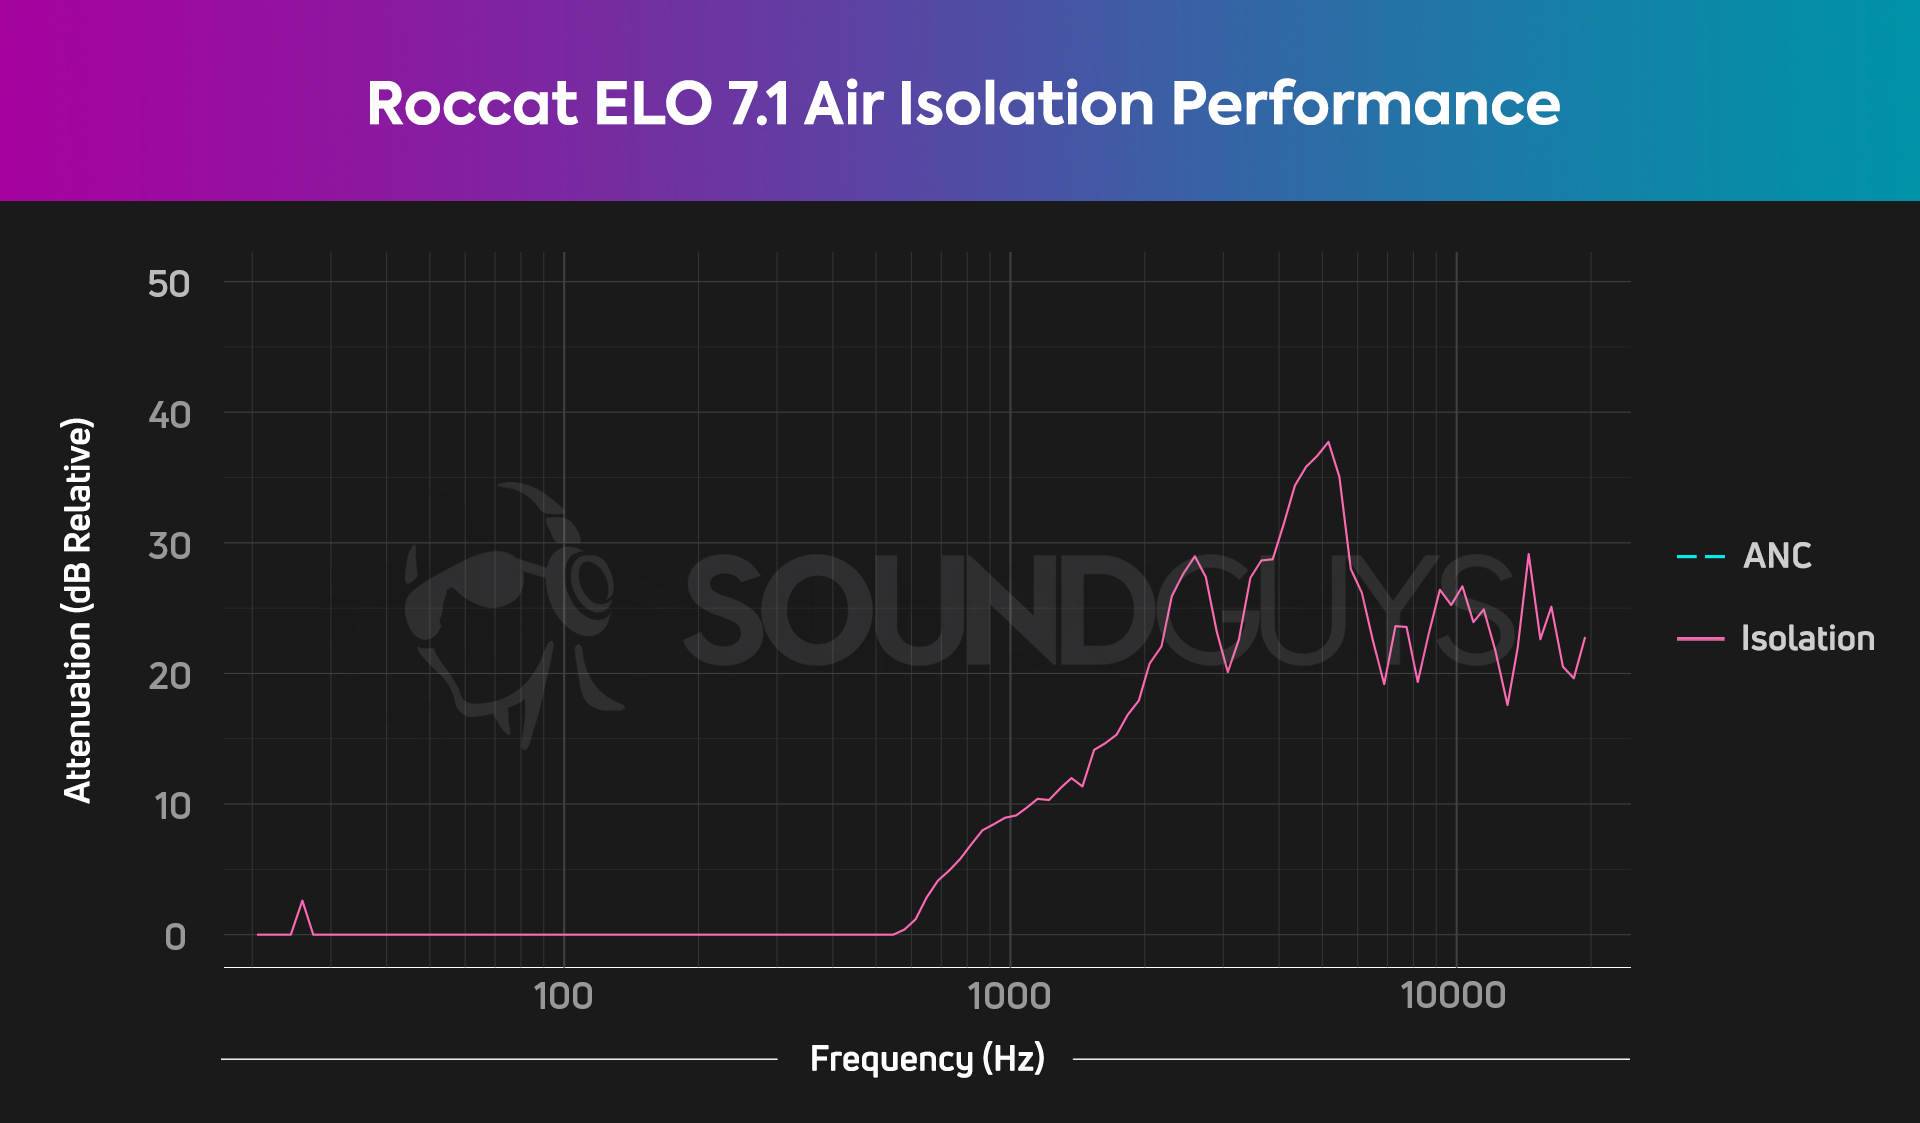 An isolation chart for the Roccat ELO 7.1 Air gaming headset, which shows mediocre isolation performance.